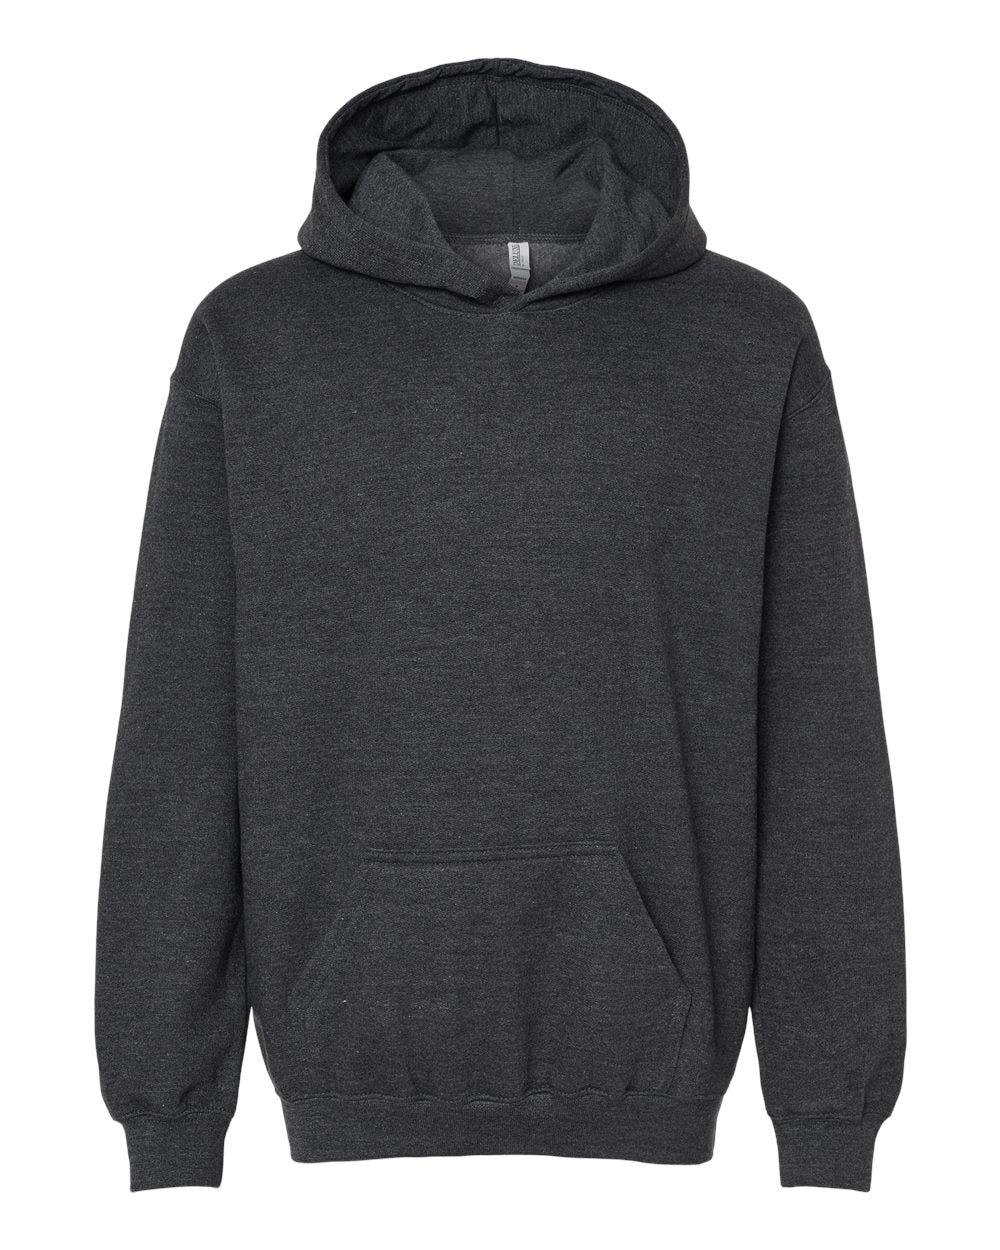 Youth Fleece Pullover Hoodie - M&O 3322